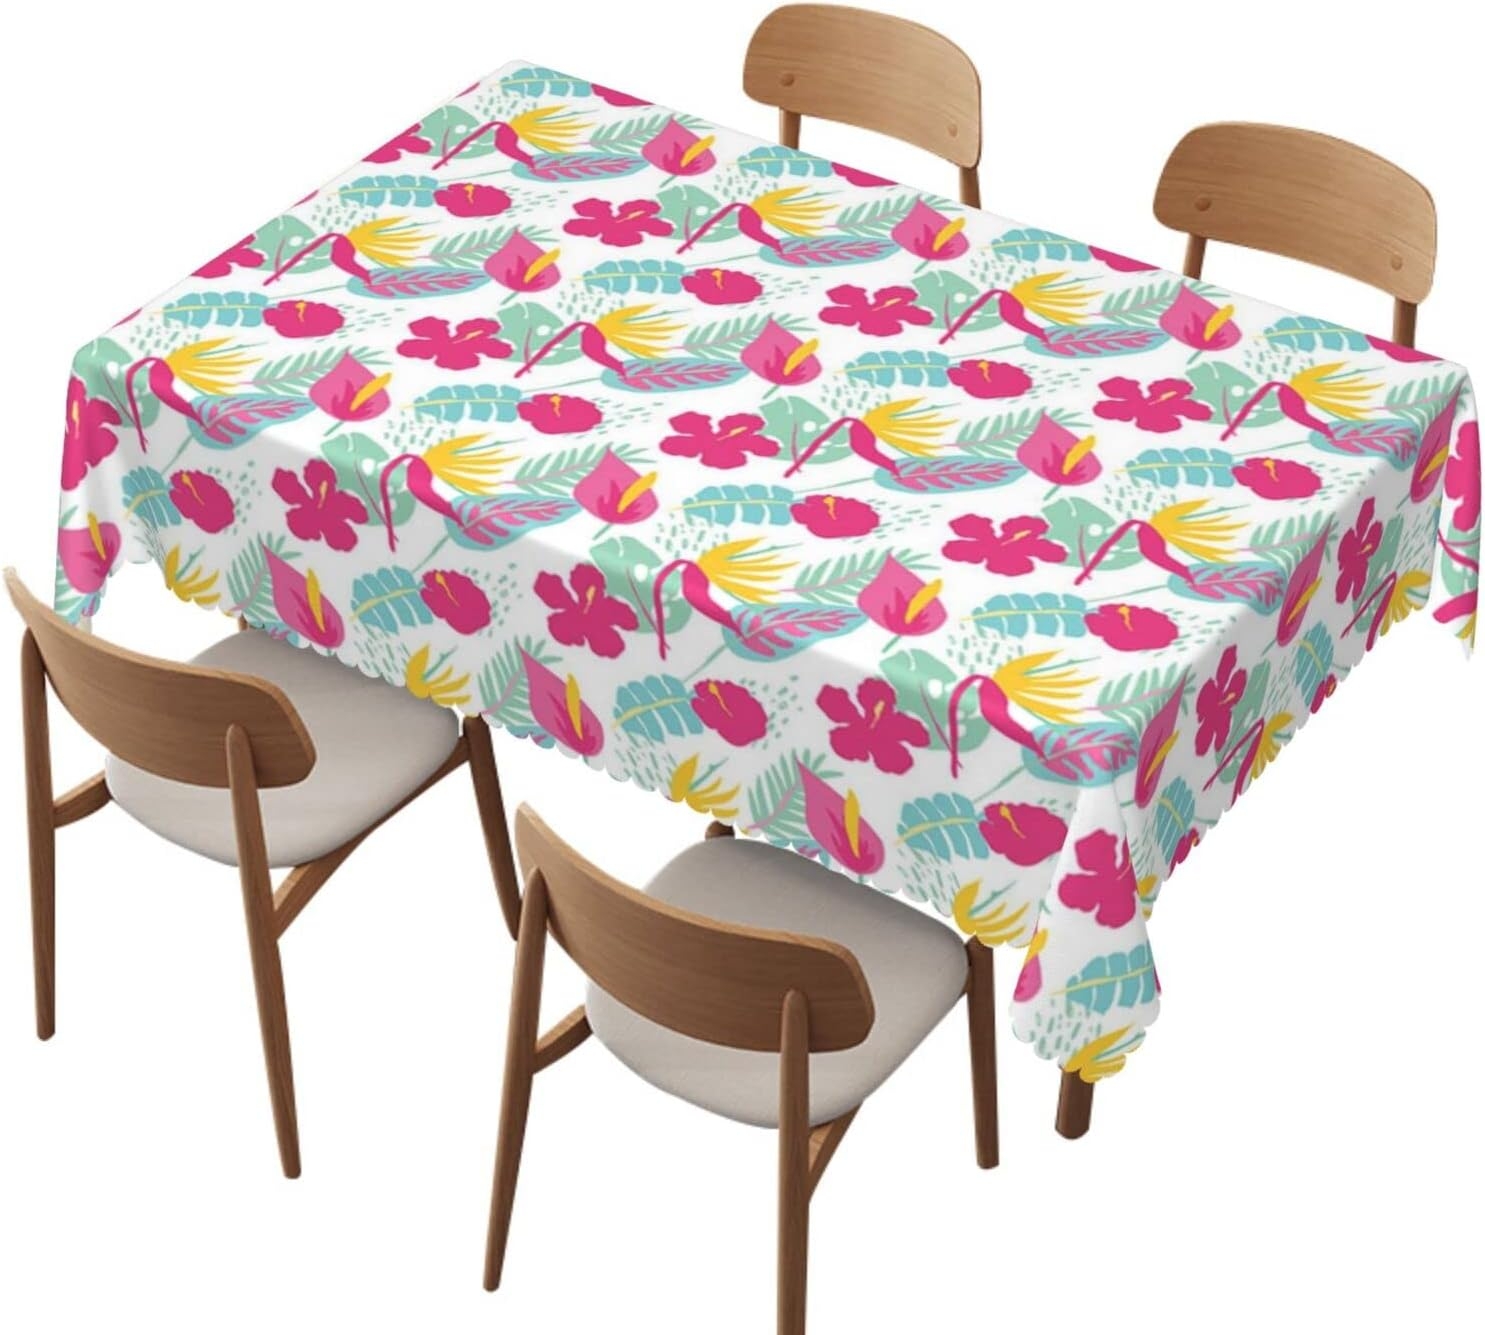 Tropical tablecloth, 60×104 inch, Waterproof Stain Wrinkle Resistant Table Cloth, for kitchen camping birthday dining dinner